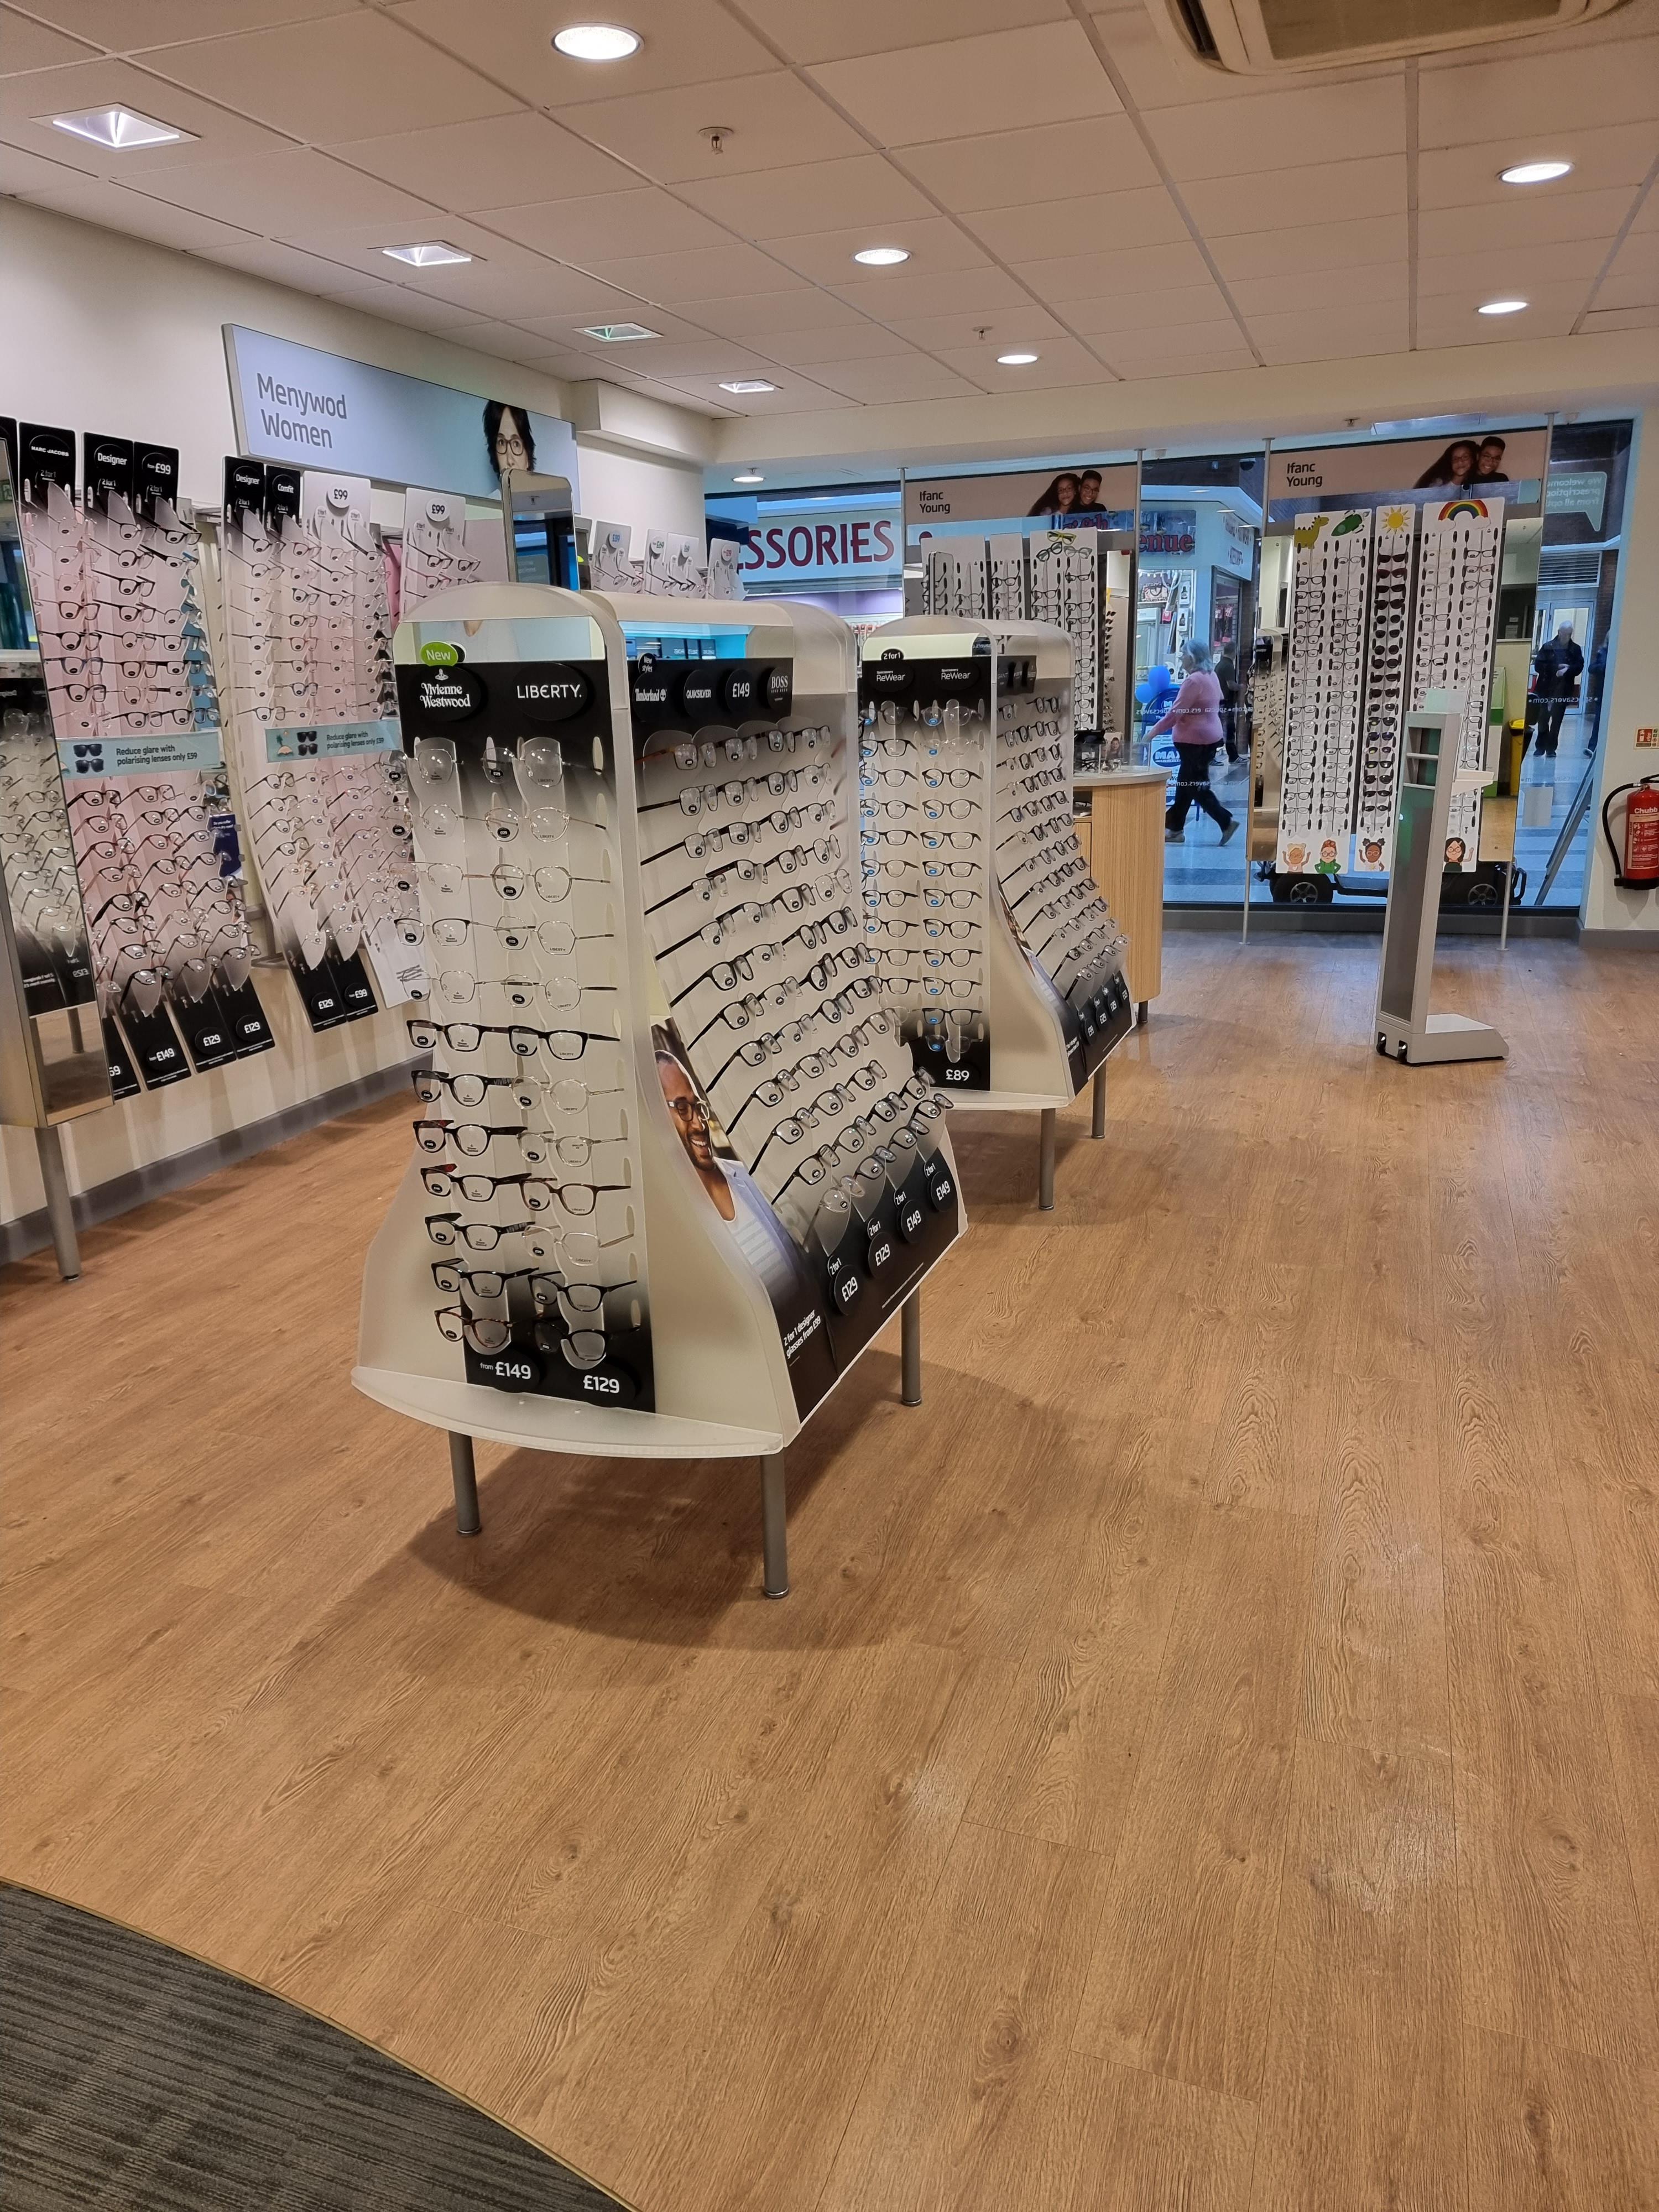 Images Specsavers Opticians and Audiologists - Rhyl